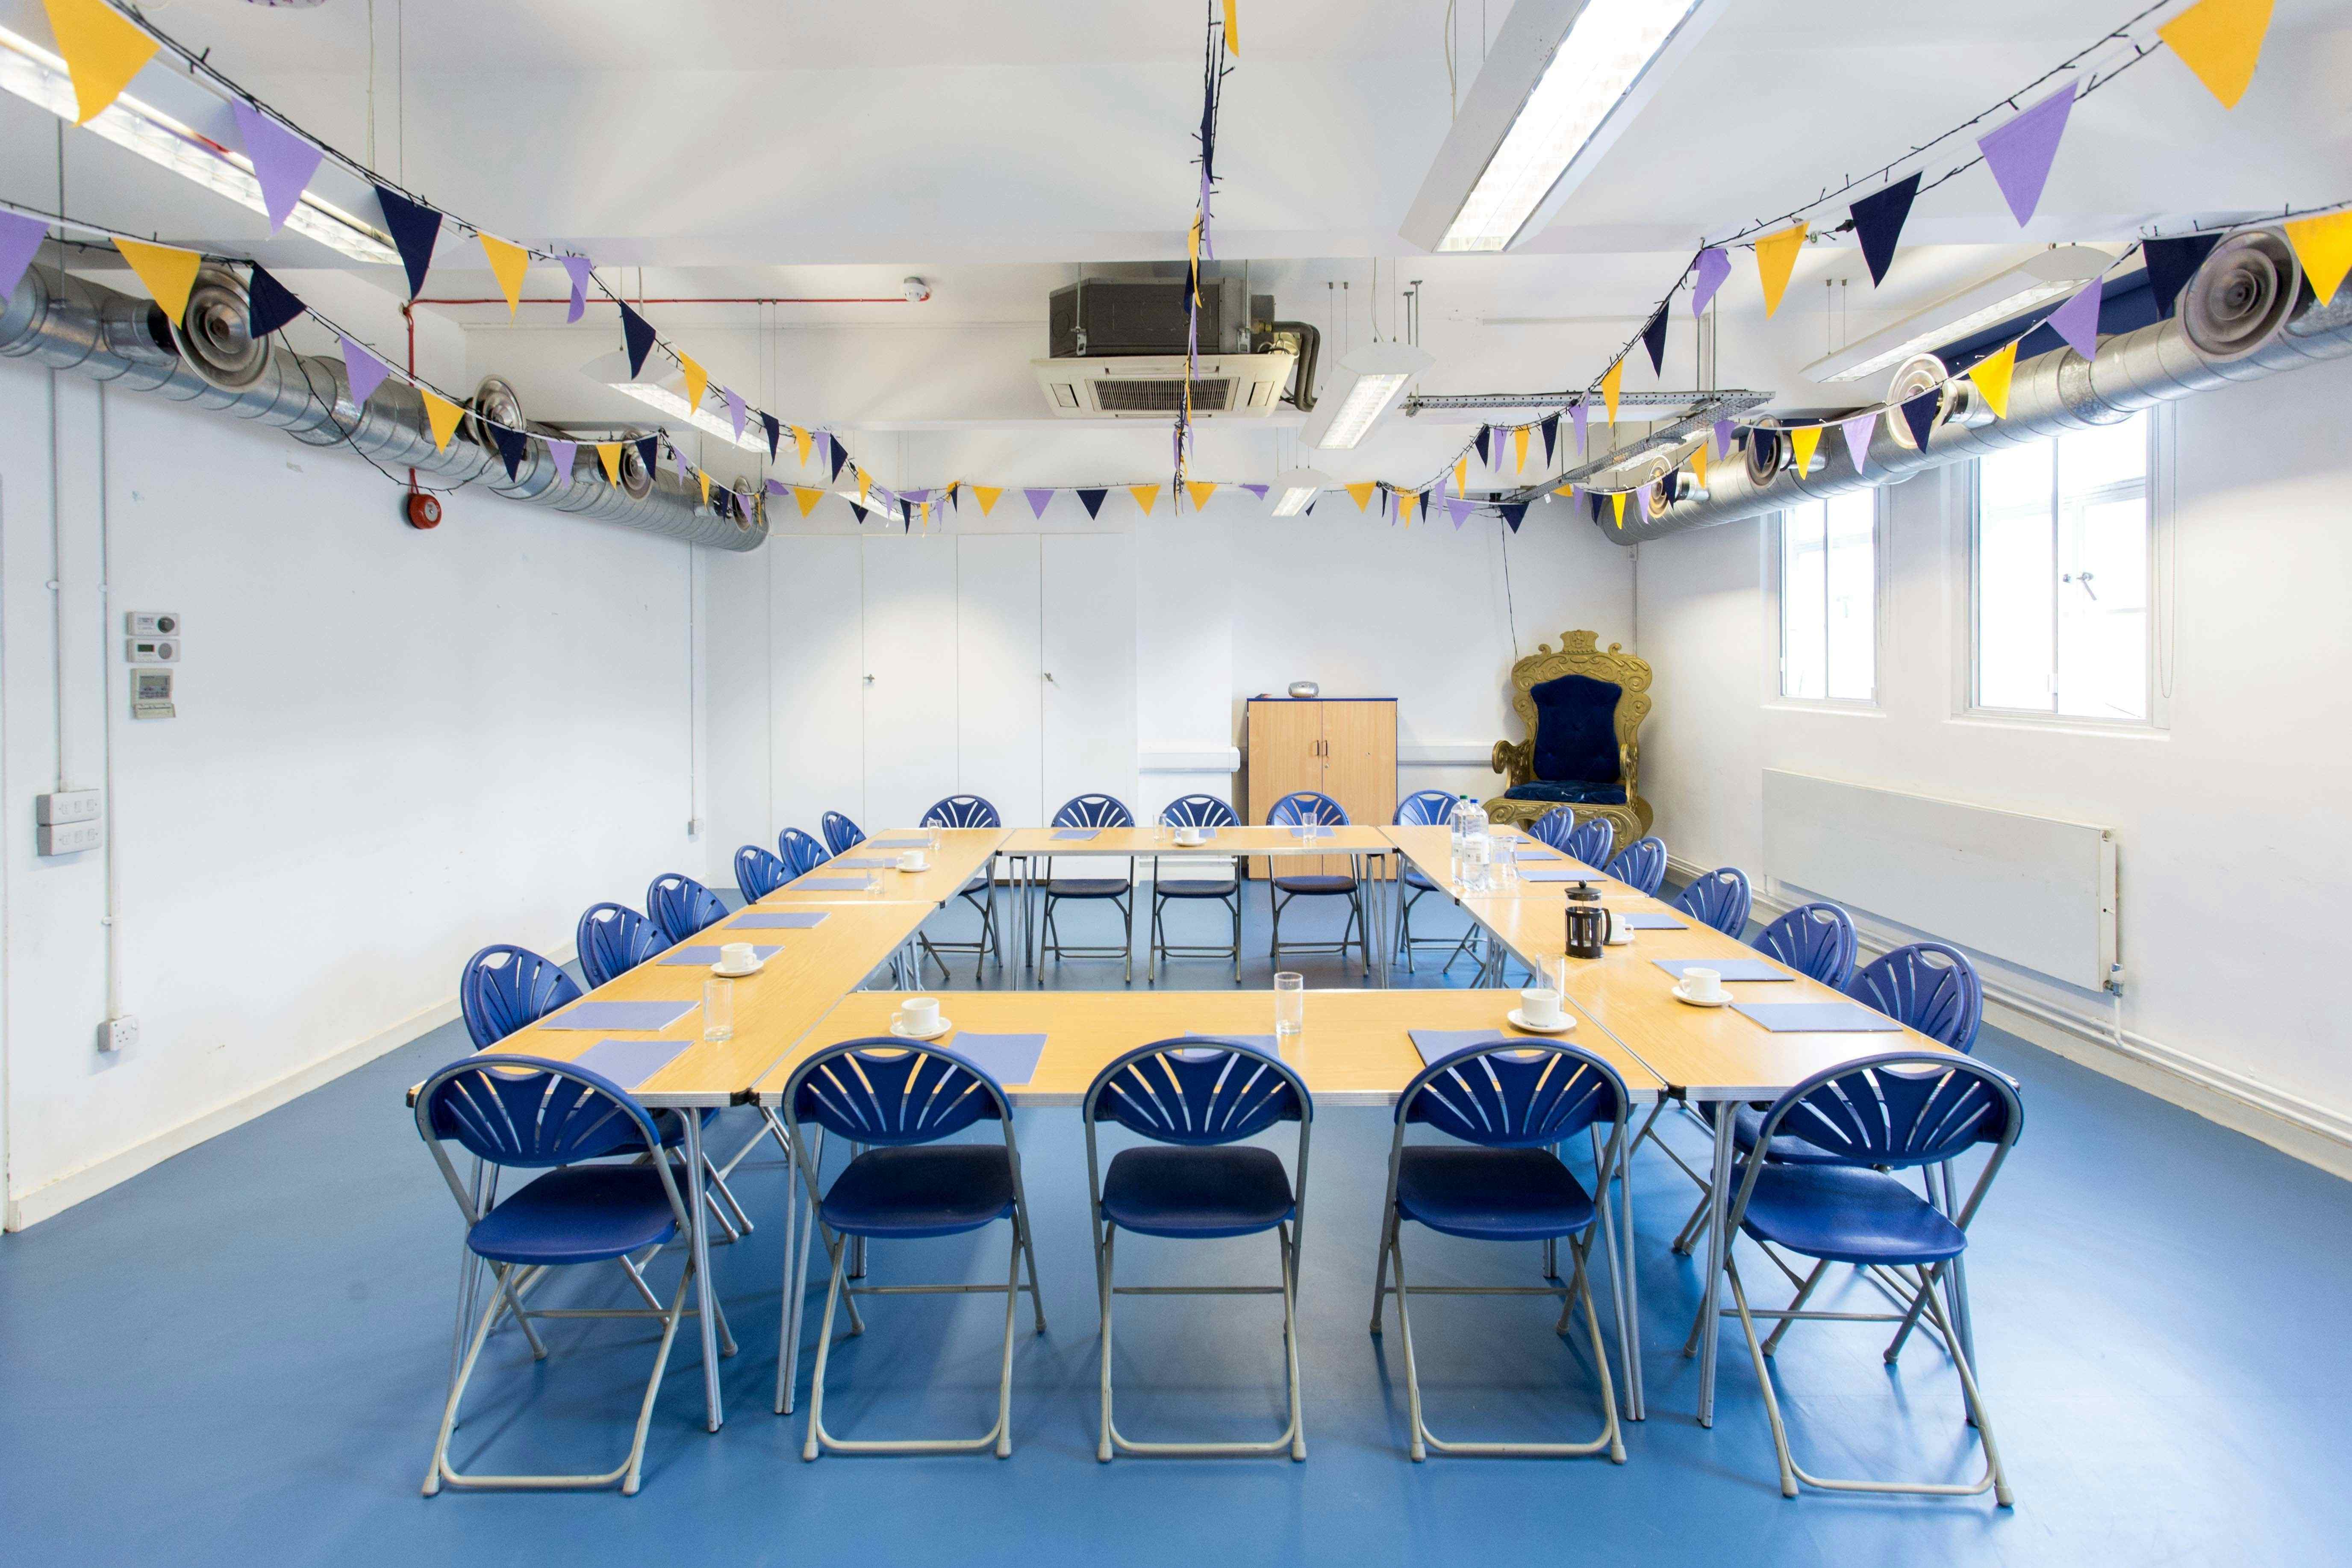 Meeting Room 2.1, Discover Children's Story Centre